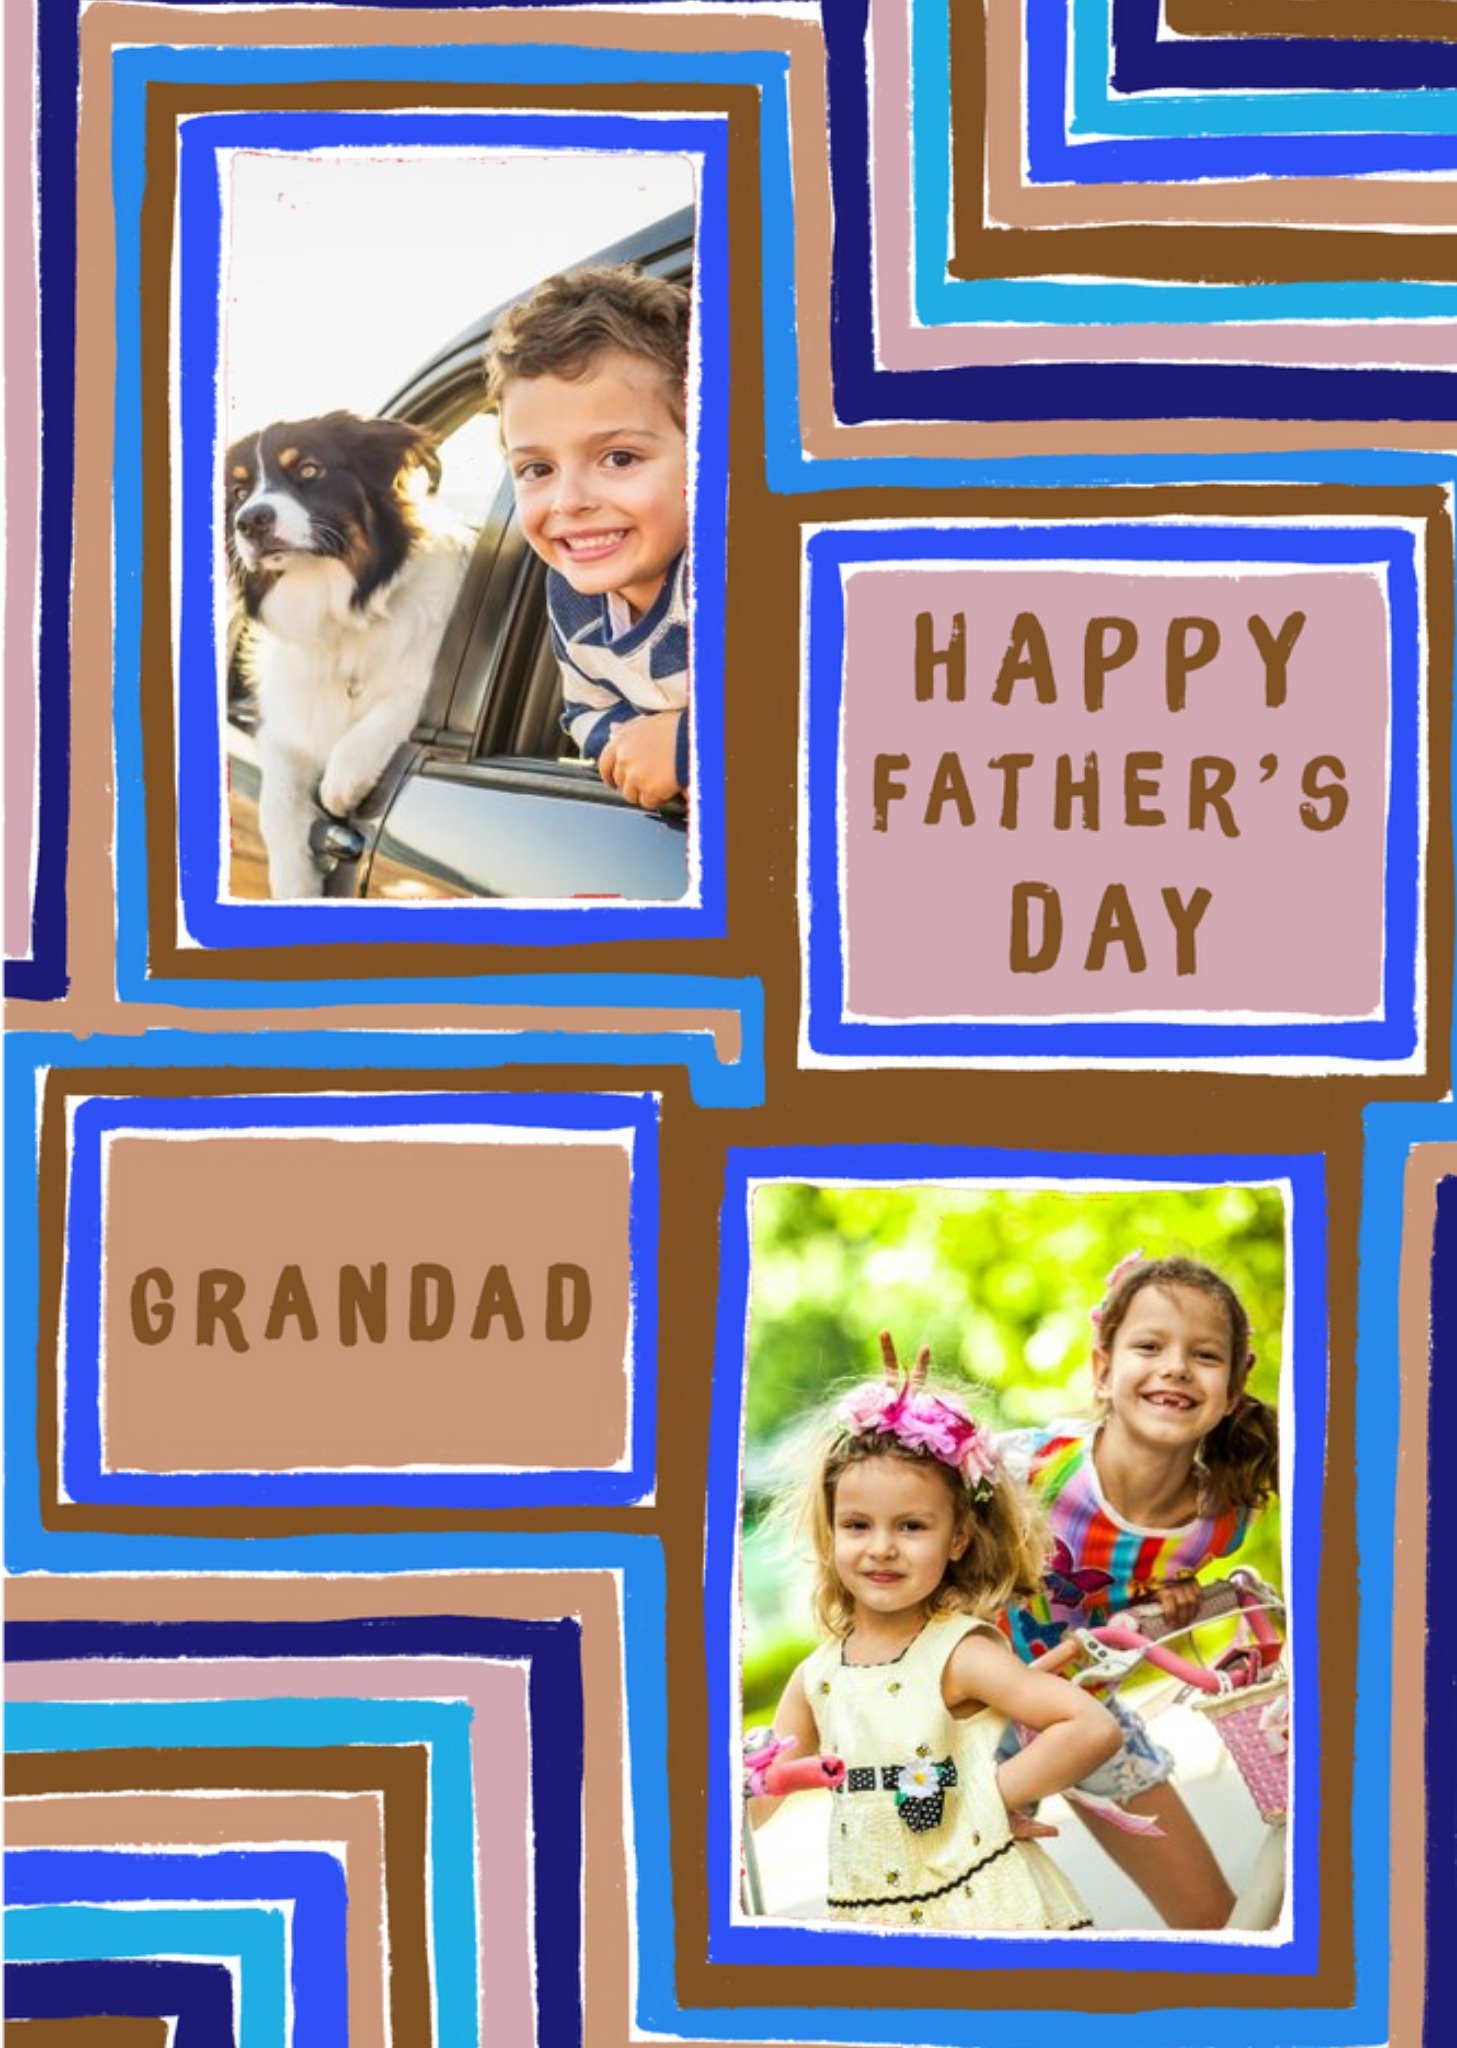 Moonpig Katy Welsh Photo Upload Pattern Happy Father's Day Card Ecard